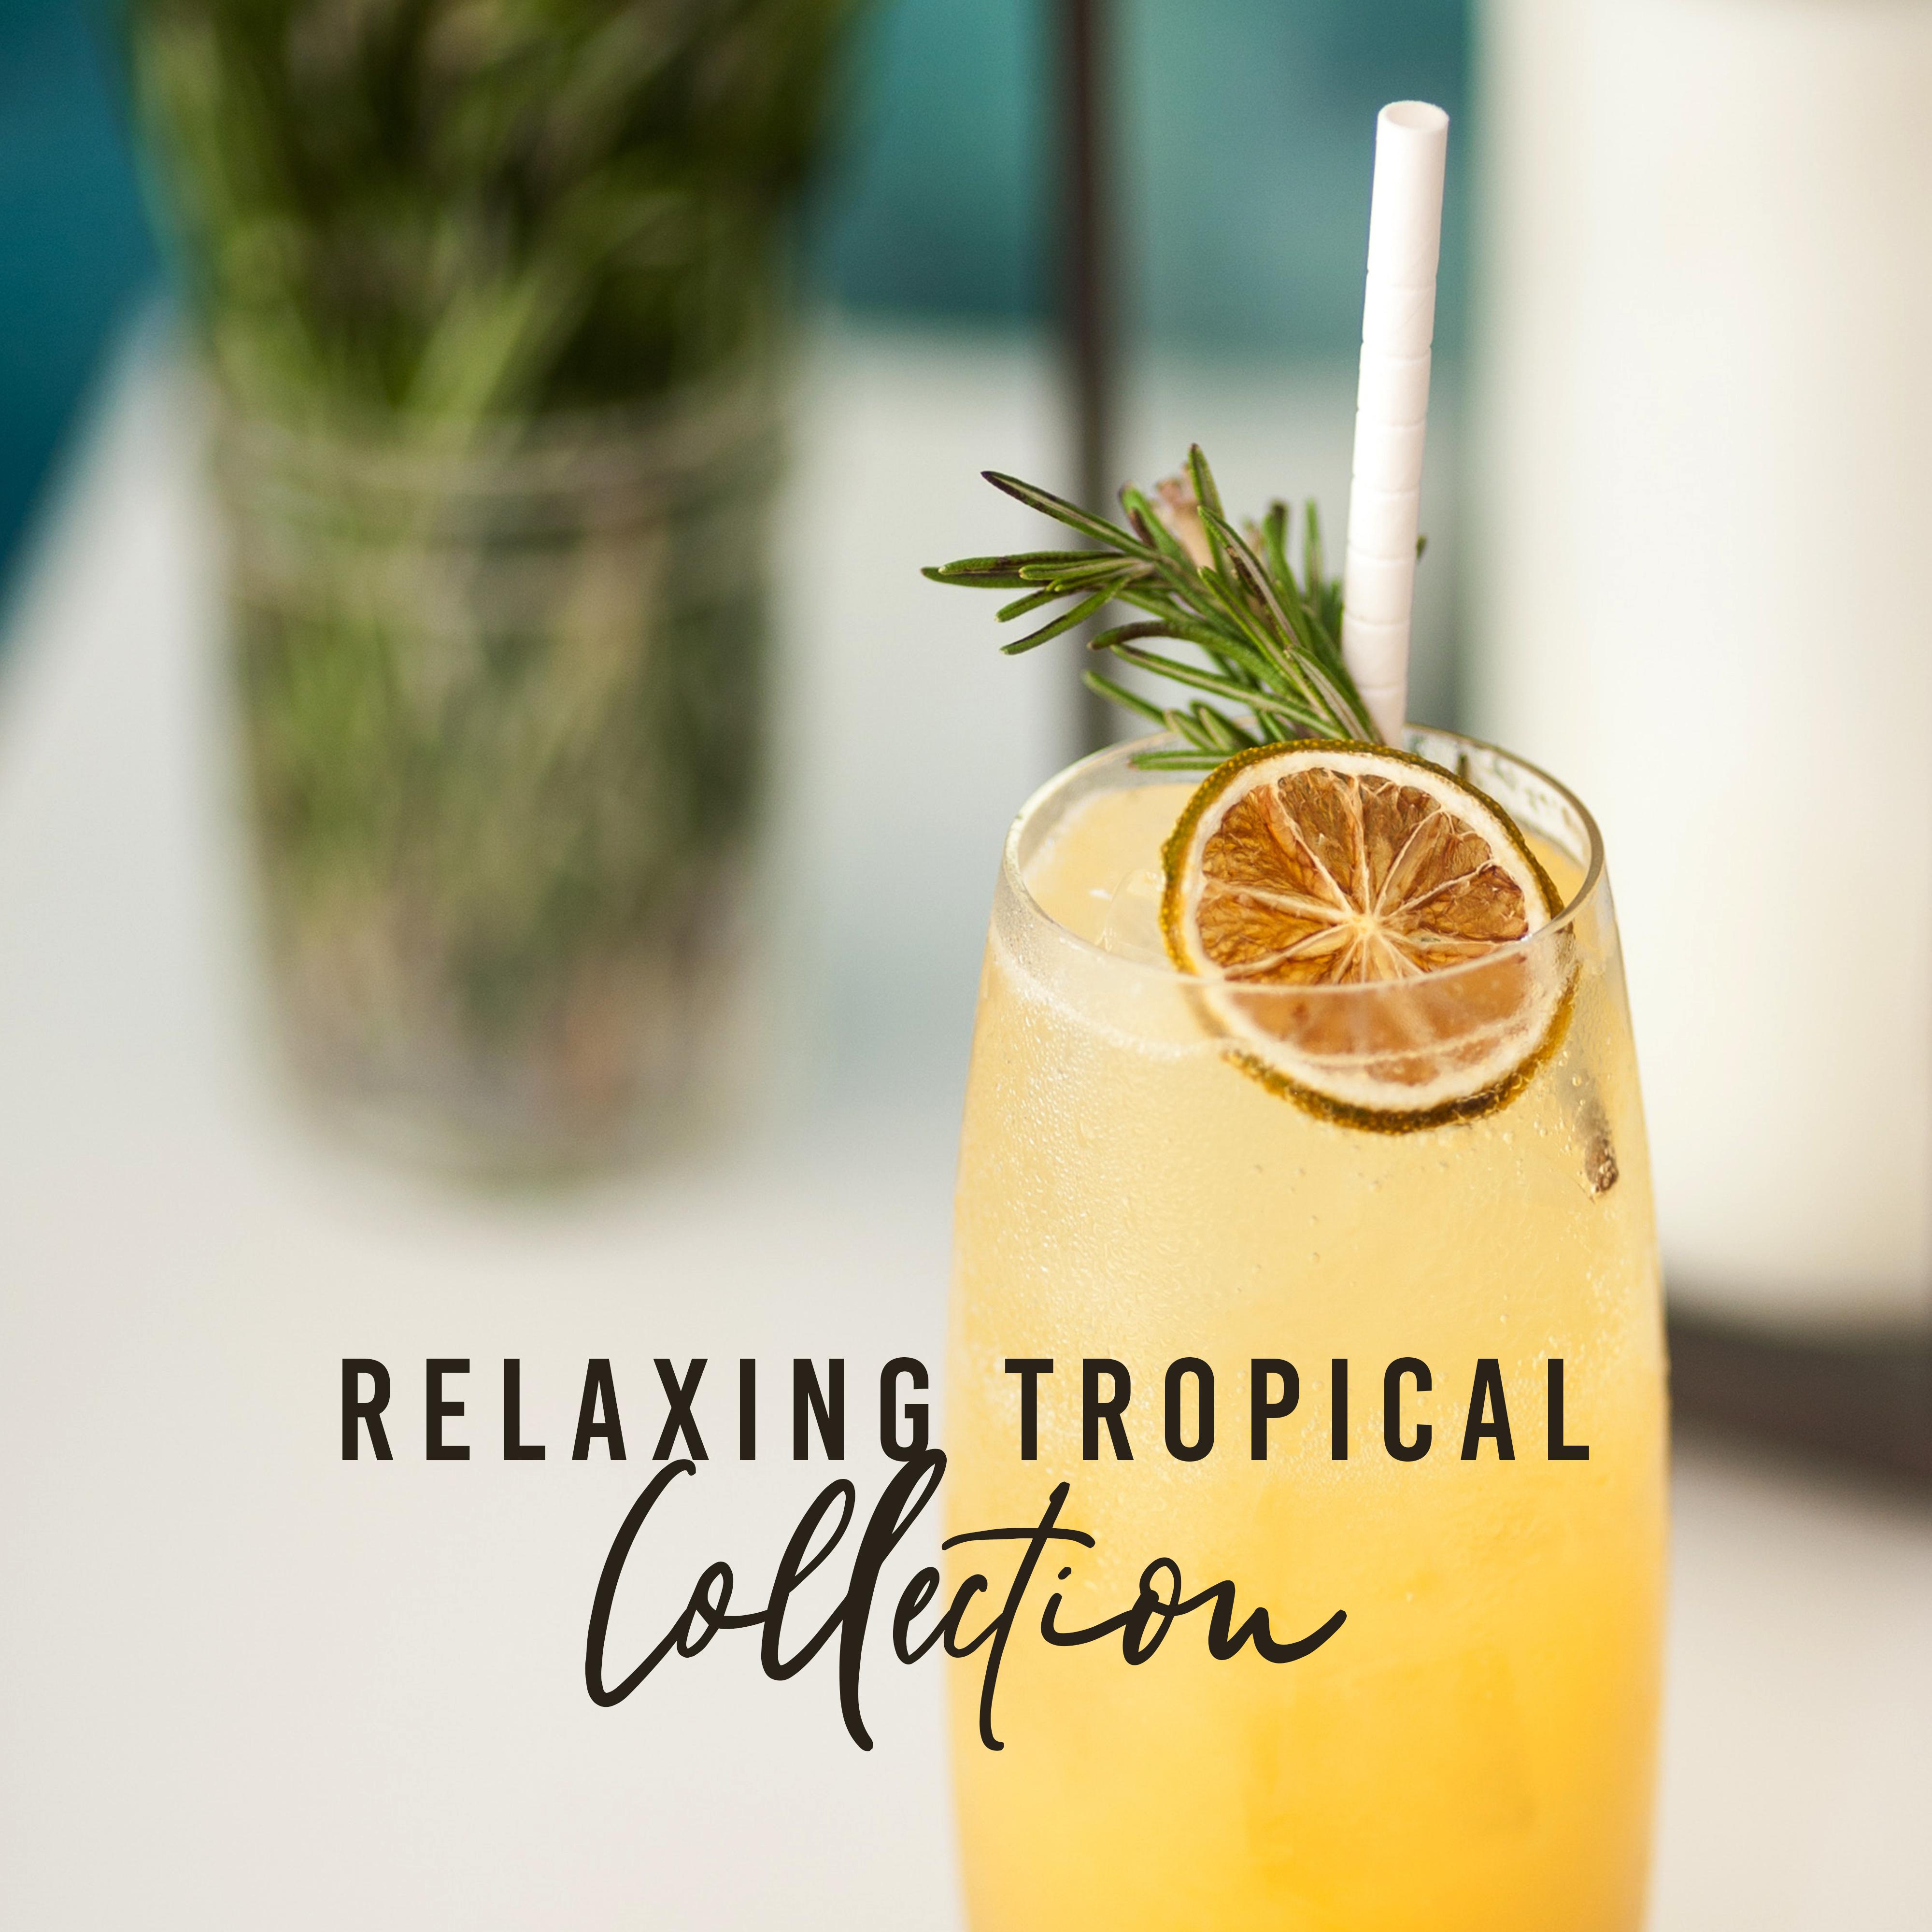 Relaxing Tropical Collection  Ibiza Chill Out, Chillout Bar Lounge, Relax, Chill Out 2019, Summertime, Inner Bliss, Sunny Chillout Lounge